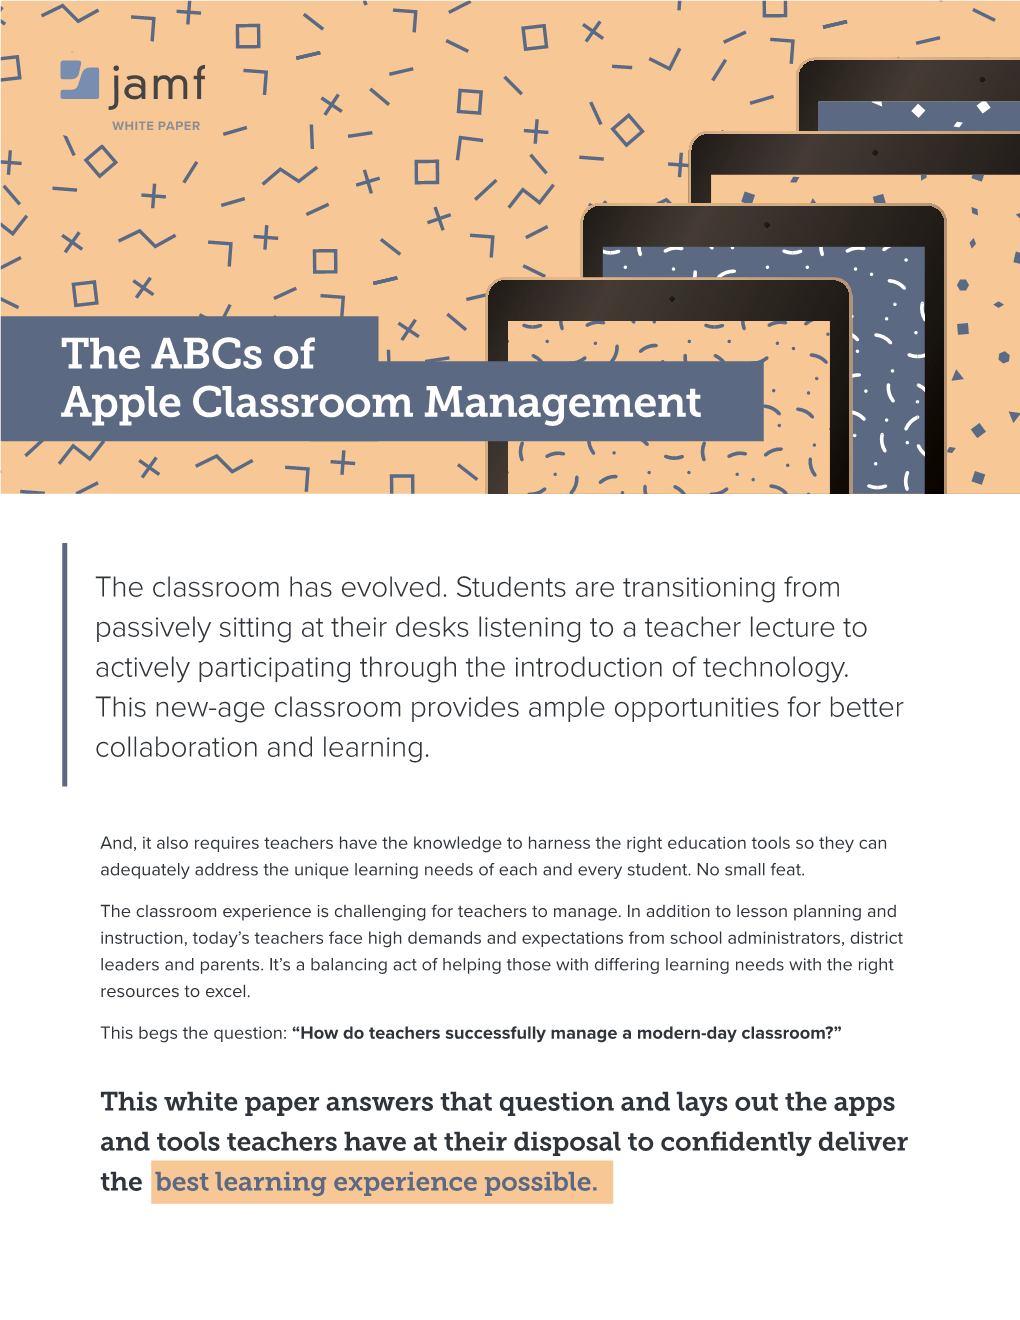 The Abcs of Apple Classroom Management